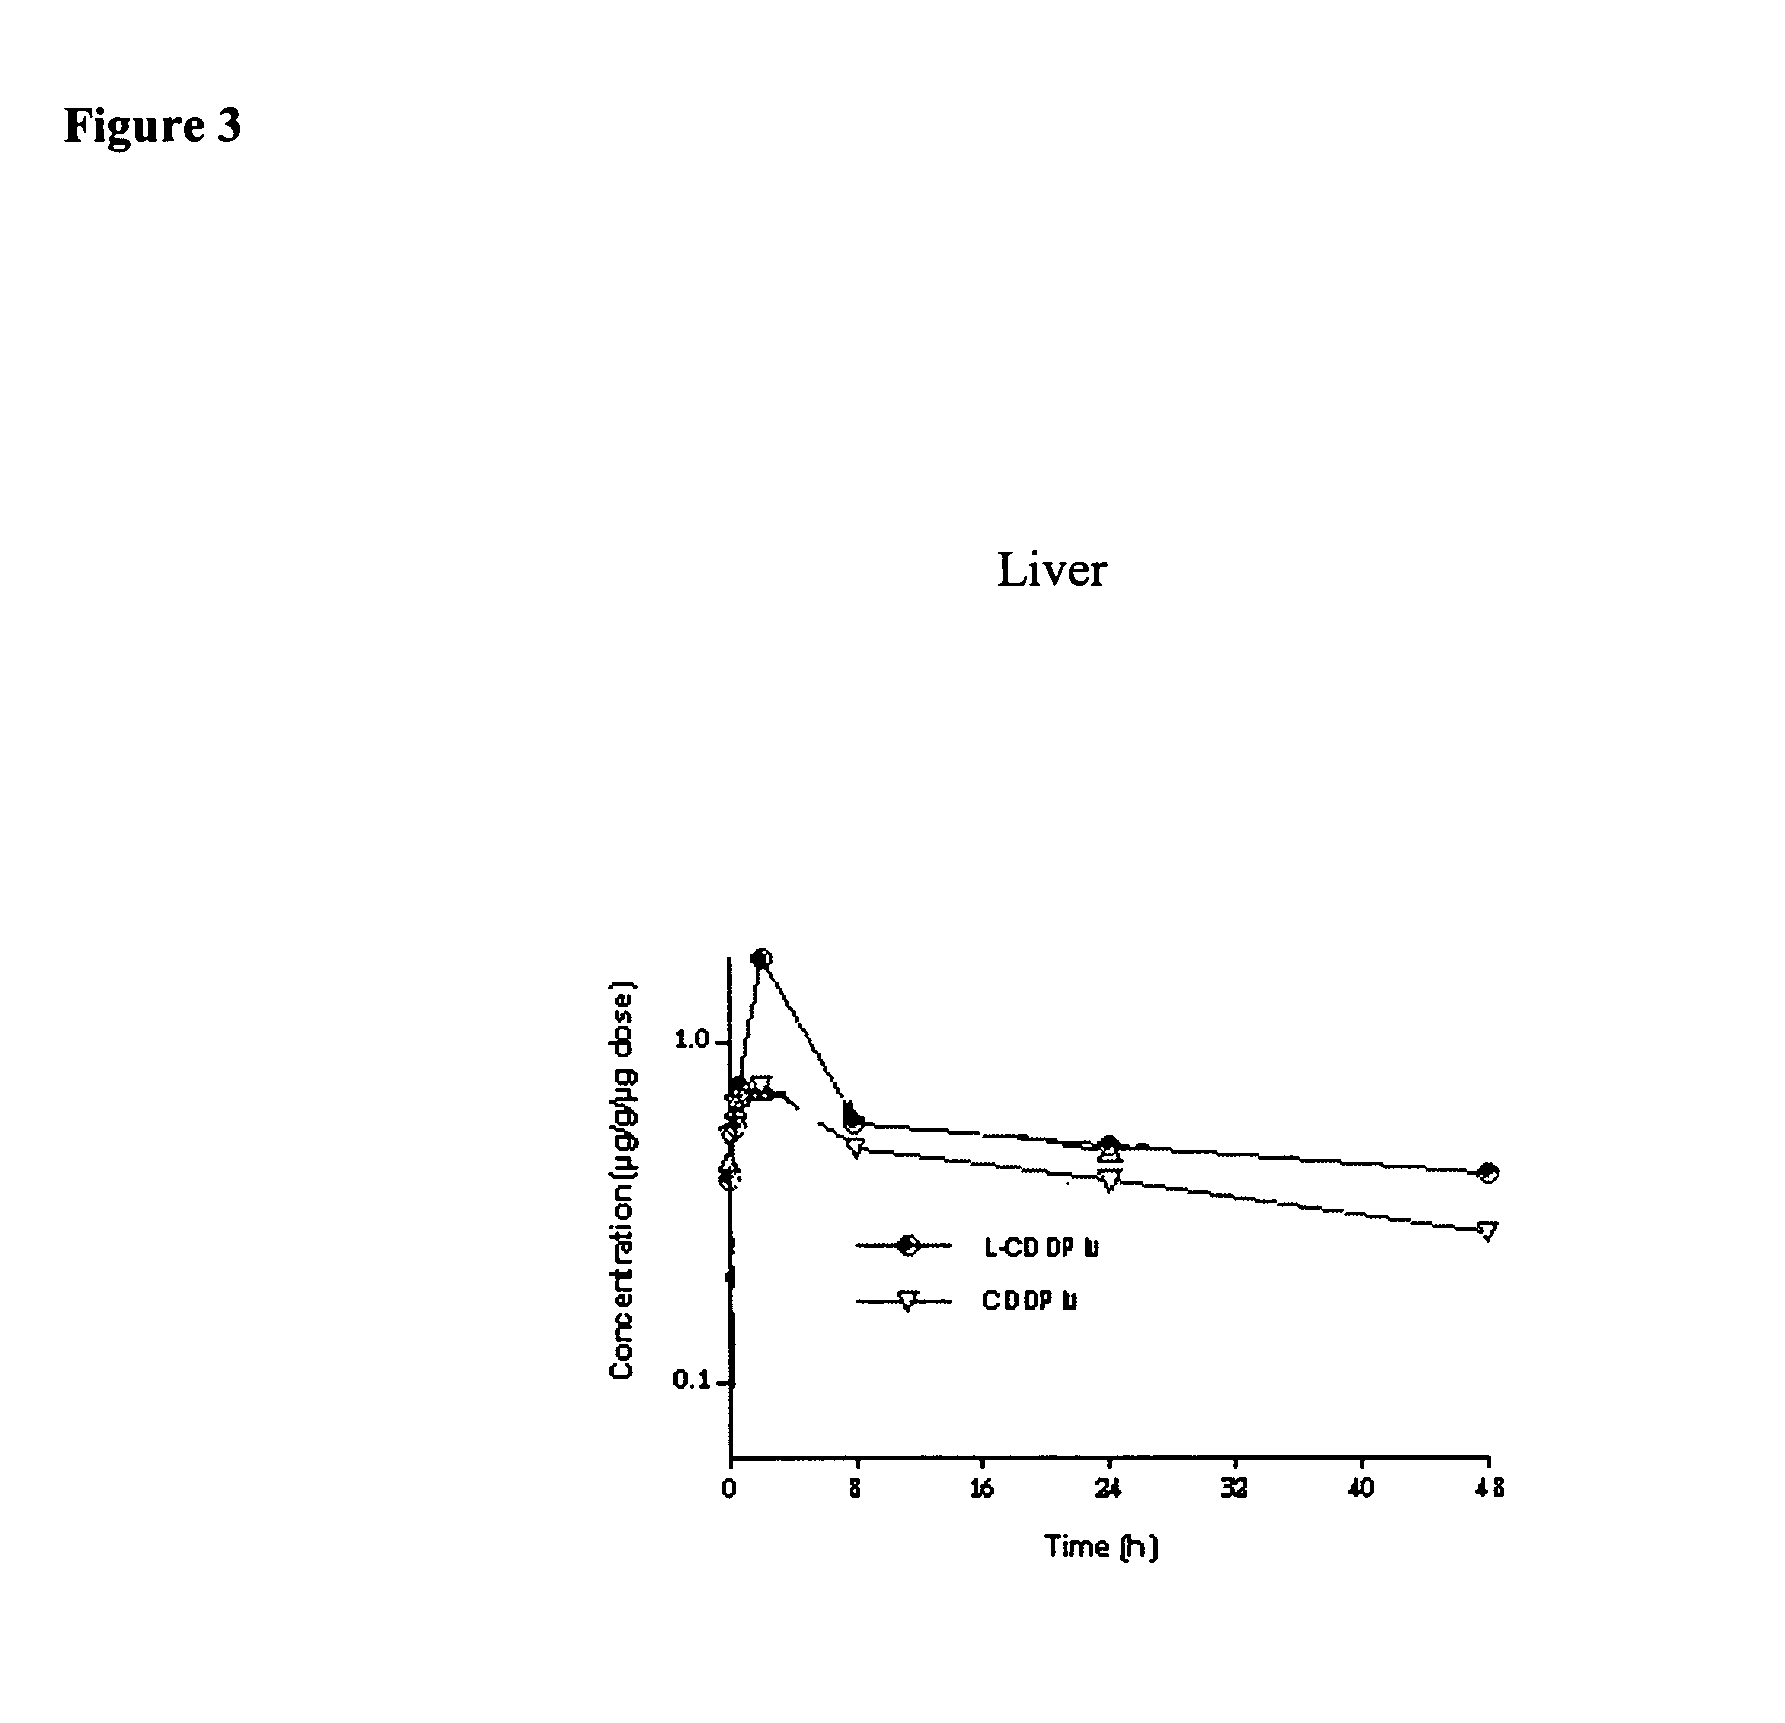 Methods of treating cancer with high potency lipid-based platinum compound formulations administered intravenously